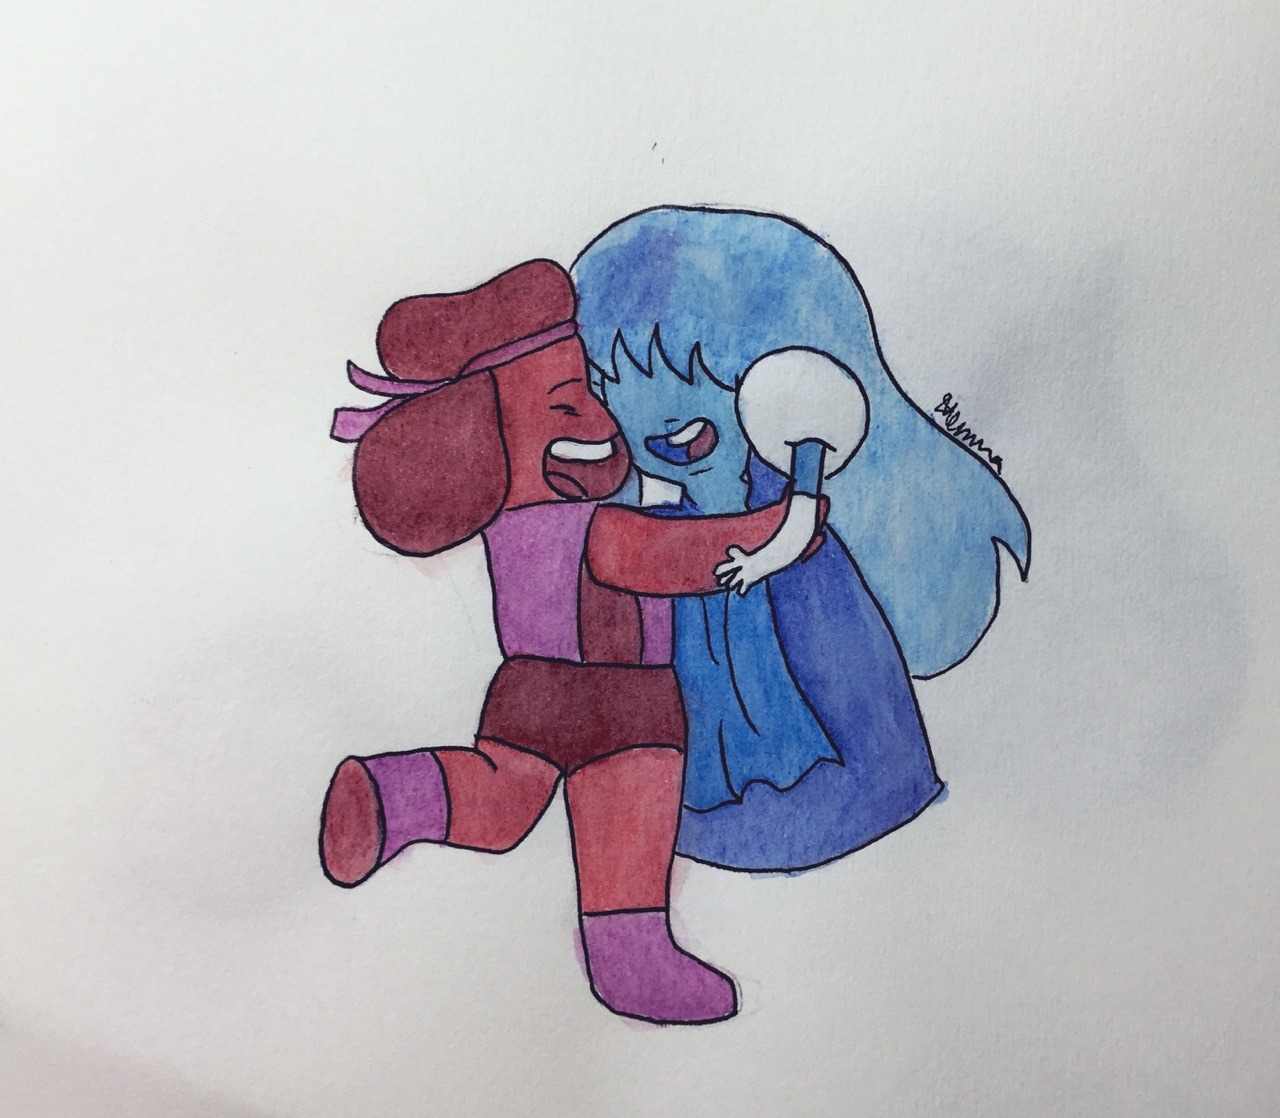 Ruby & Sapphire My Steven Universe fanart Tried doing some watercolour pencil work rather than digital!